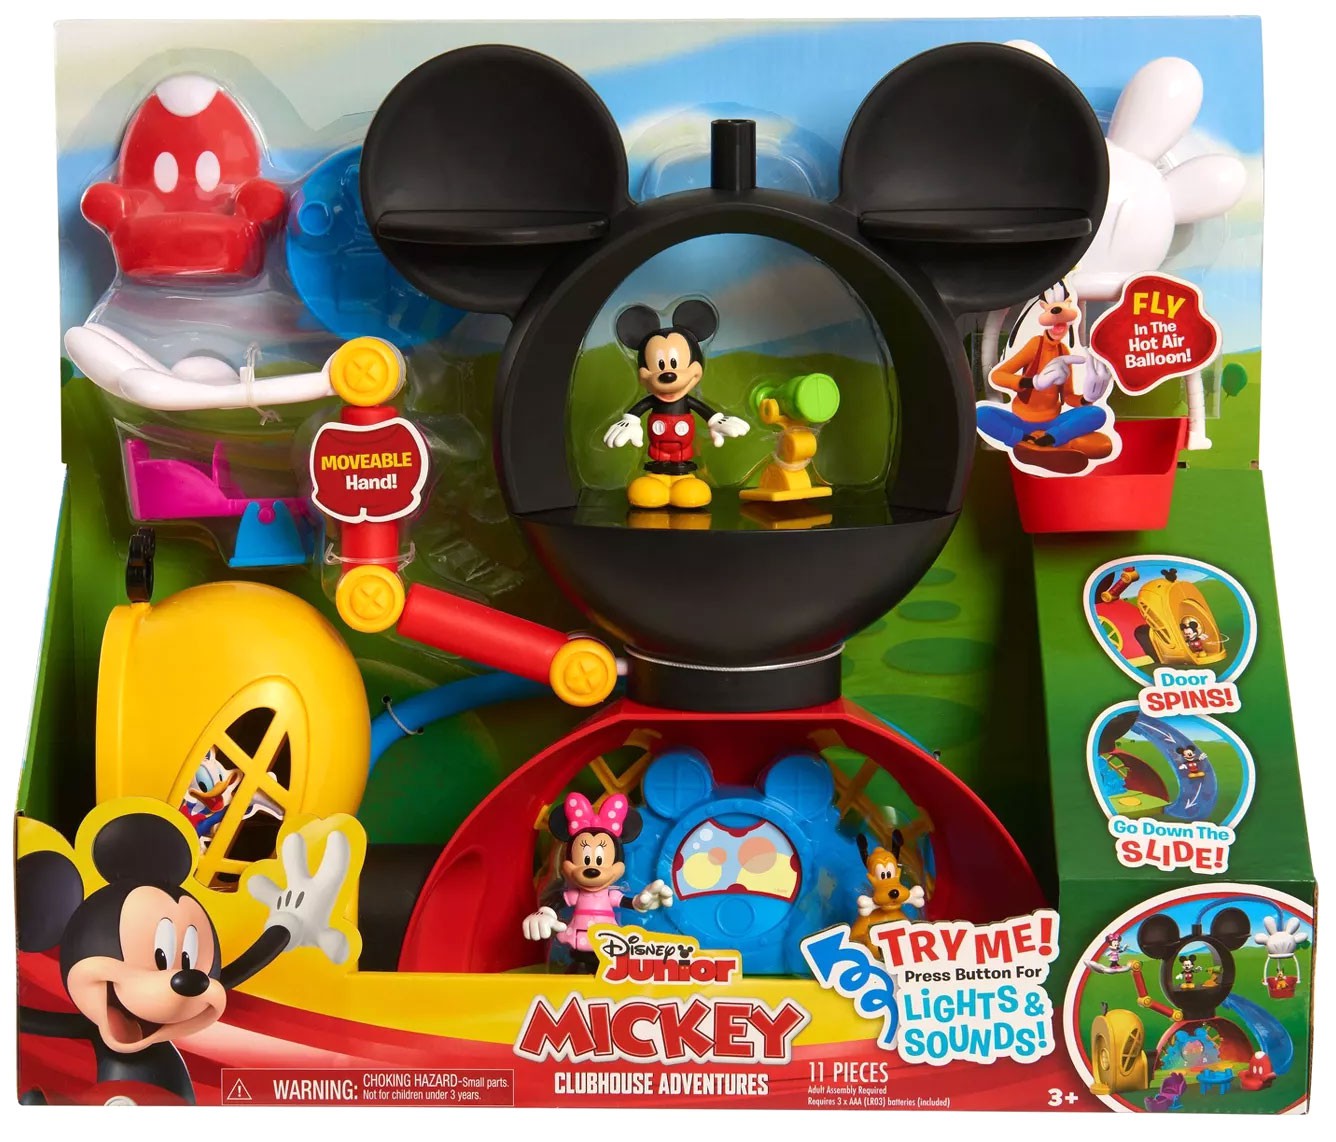 Disney Mickey Mouse Clubhouse Adventures Playset 886144384769 Ebay